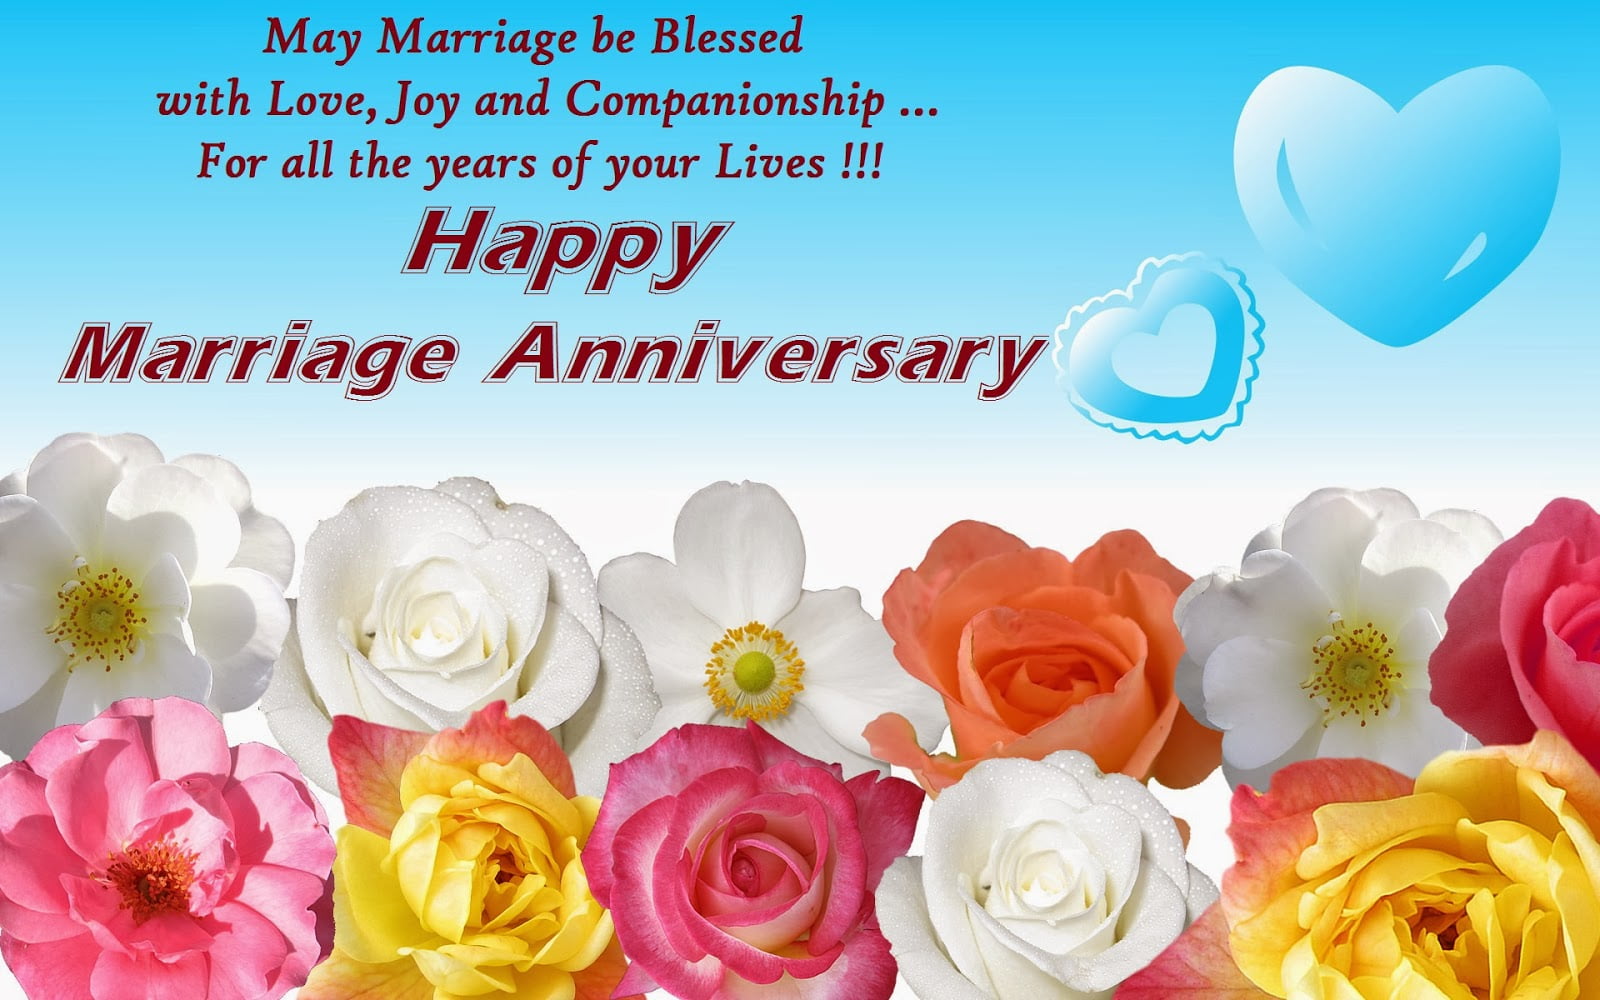 happy-wedding-anniversary-wishes-images-cards-greetings-photos-for-husband-wife